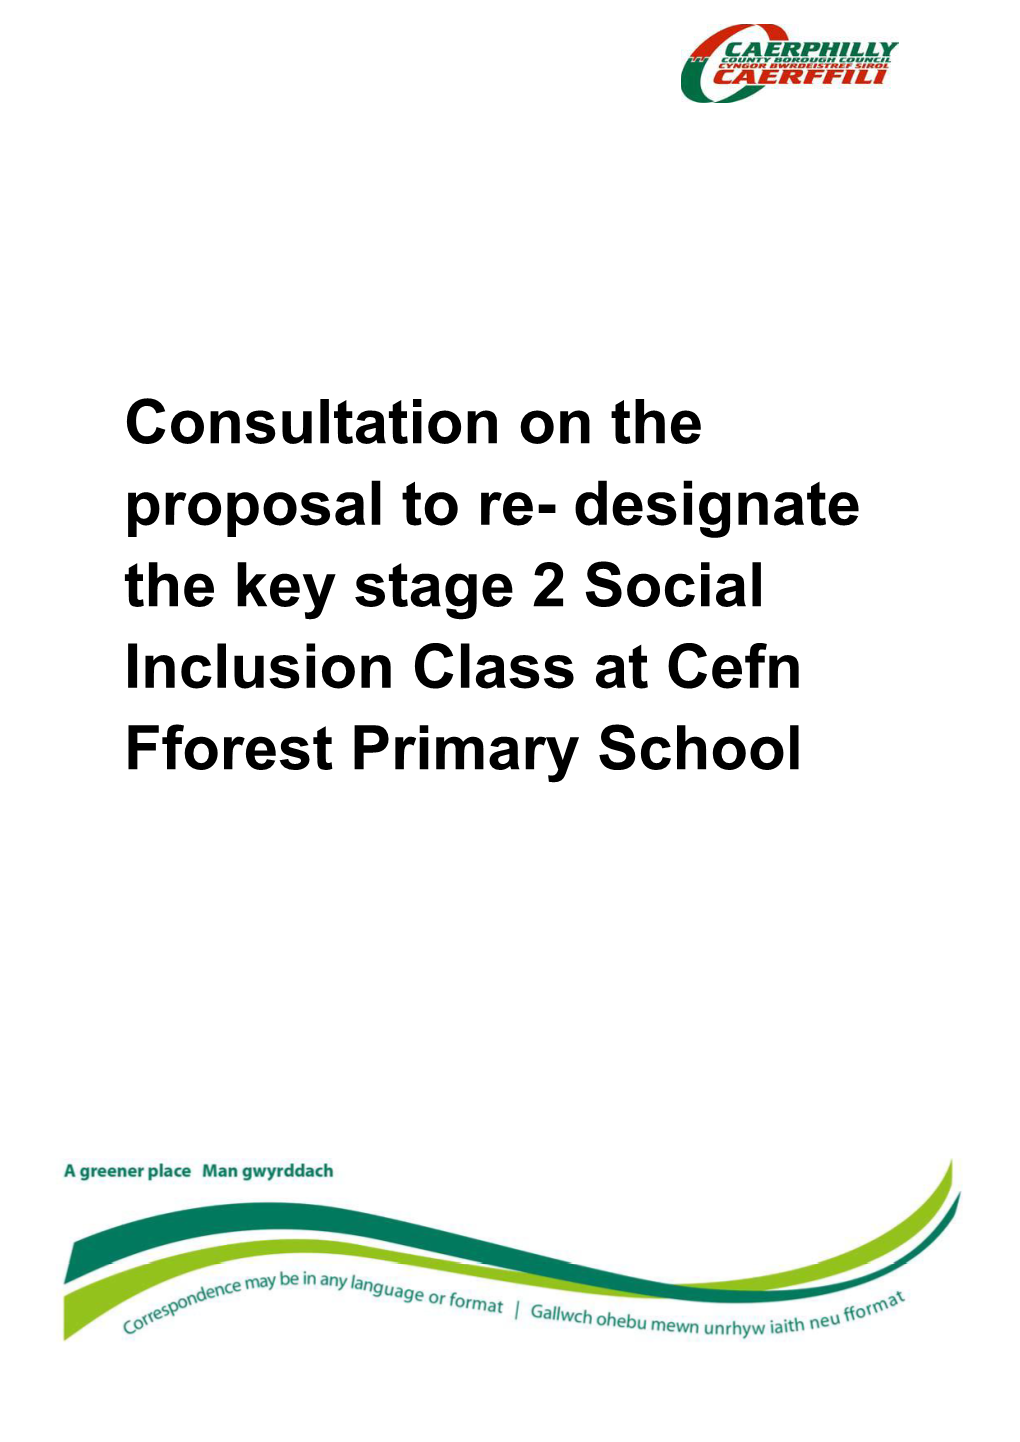 Designate the Key Stage 2 Social Inclusion Class at Cefn Fforest Primary School